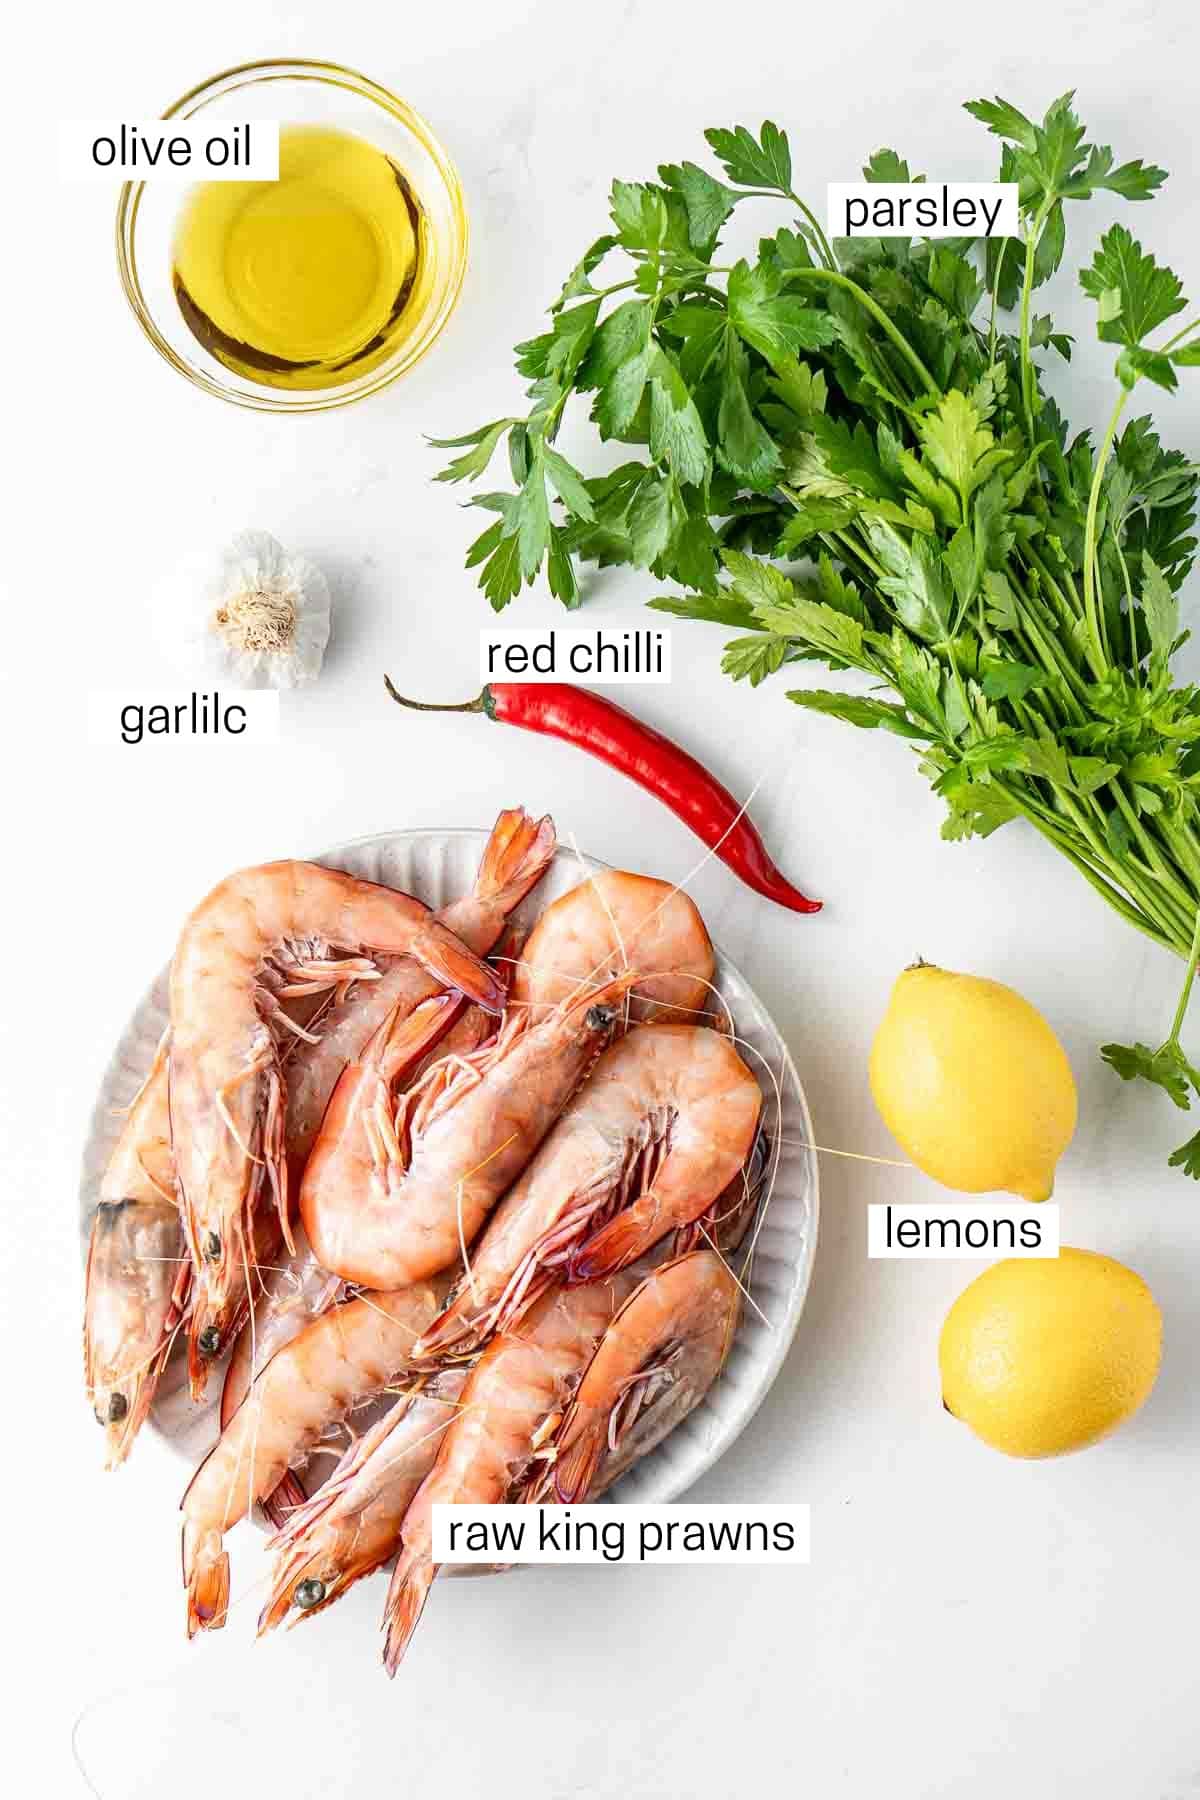 All ingredients needed to make grilled prawns laid out.